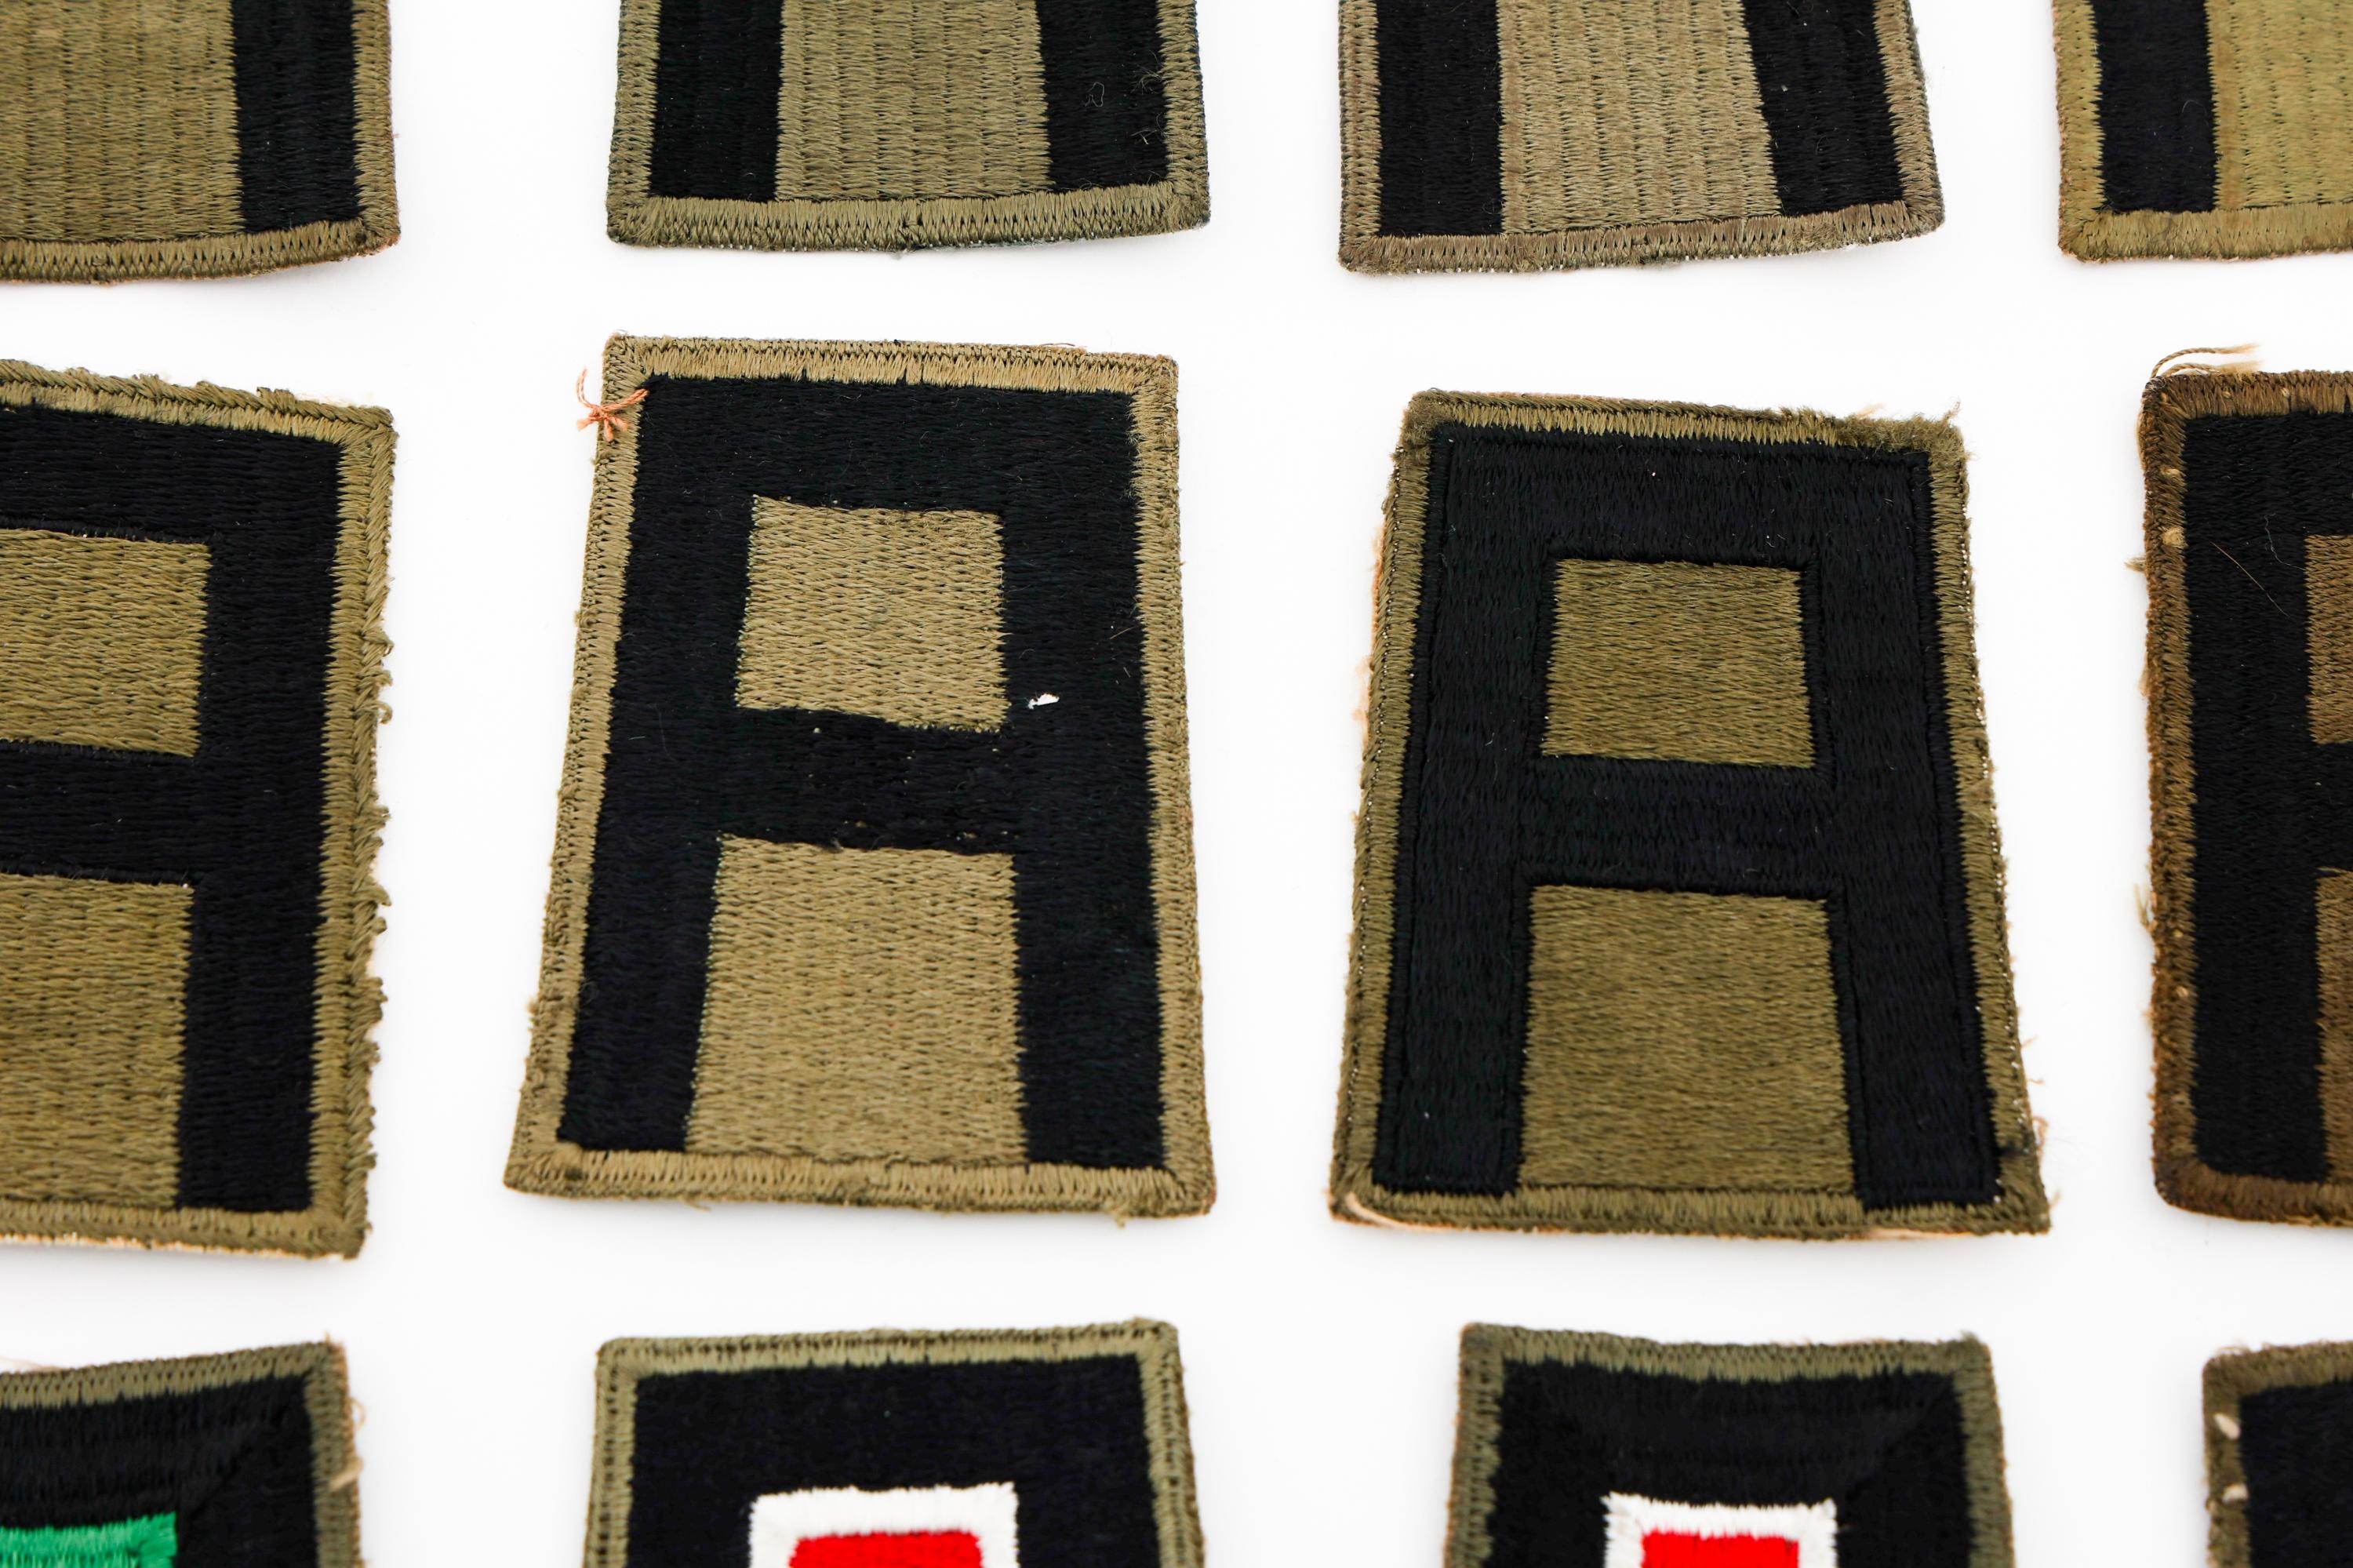 WWII US 1ST ARMY VARIATION SHOULDER PATCHES